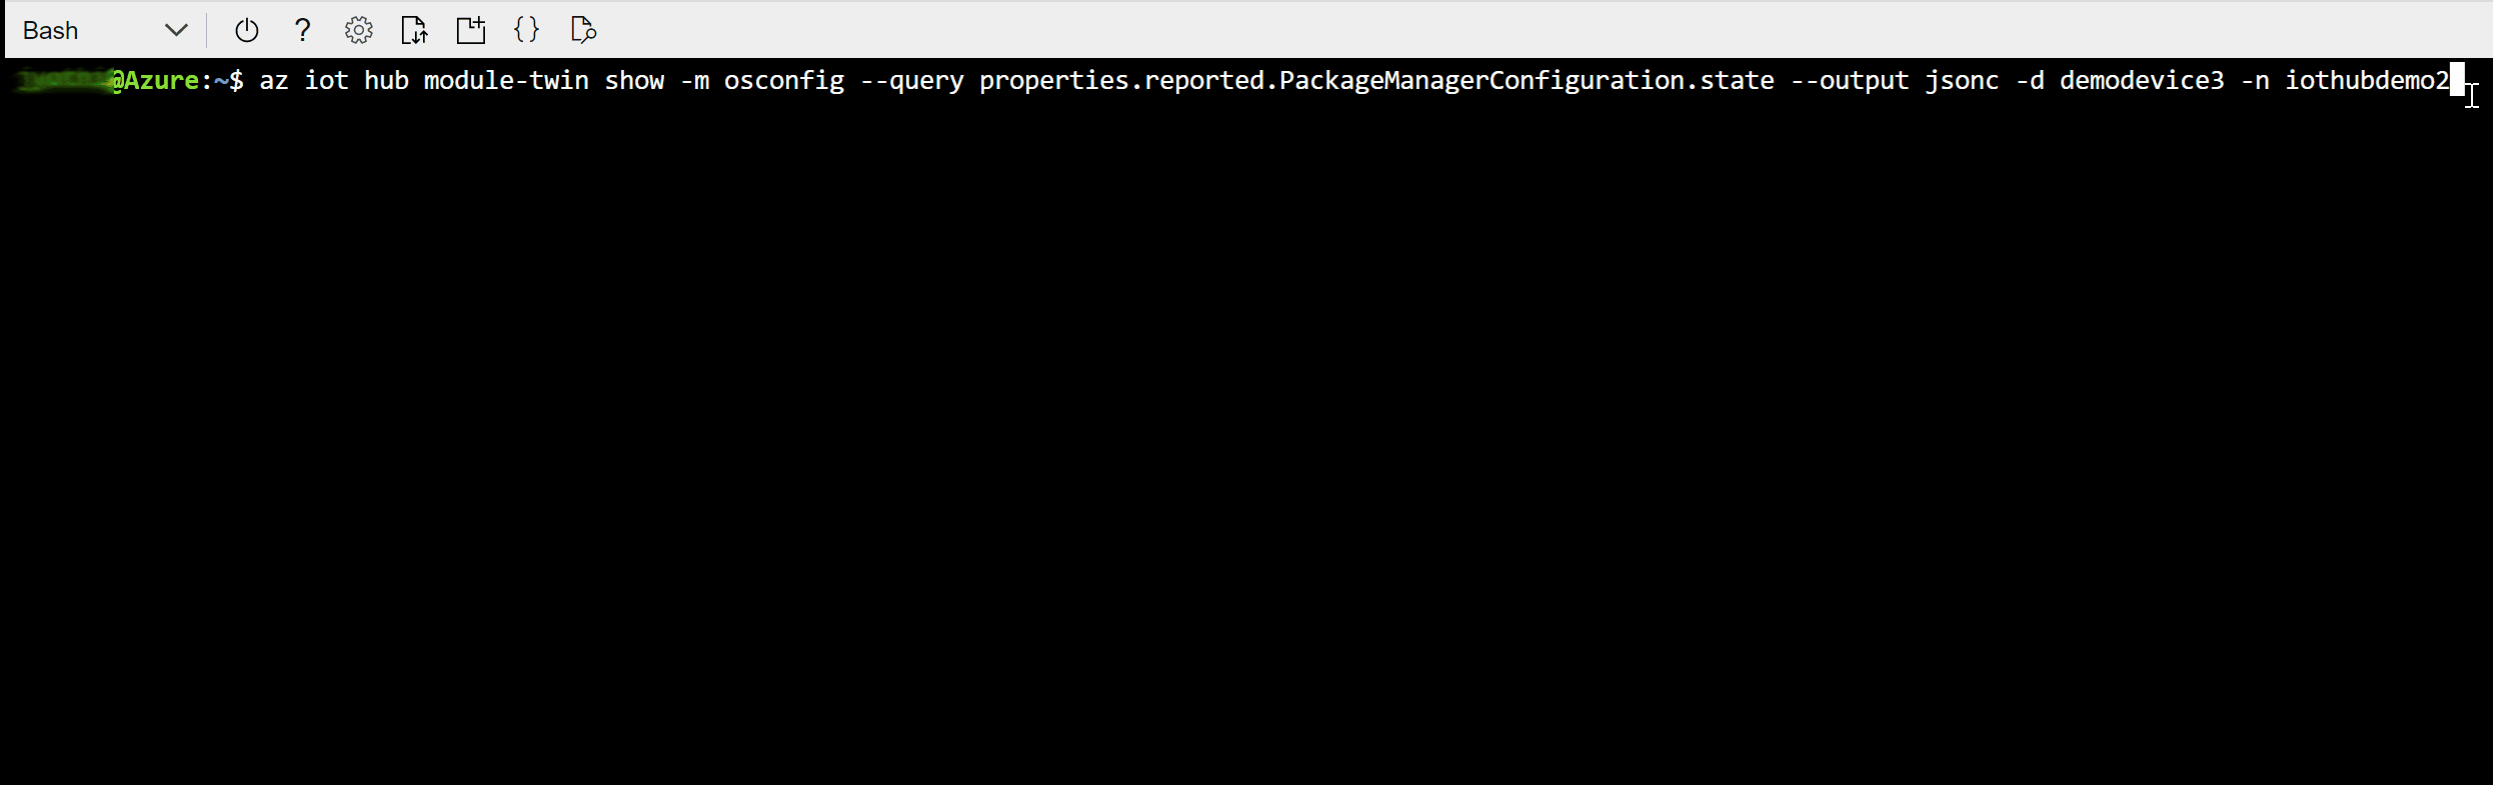 Screen capture showing how to verify a single using bash